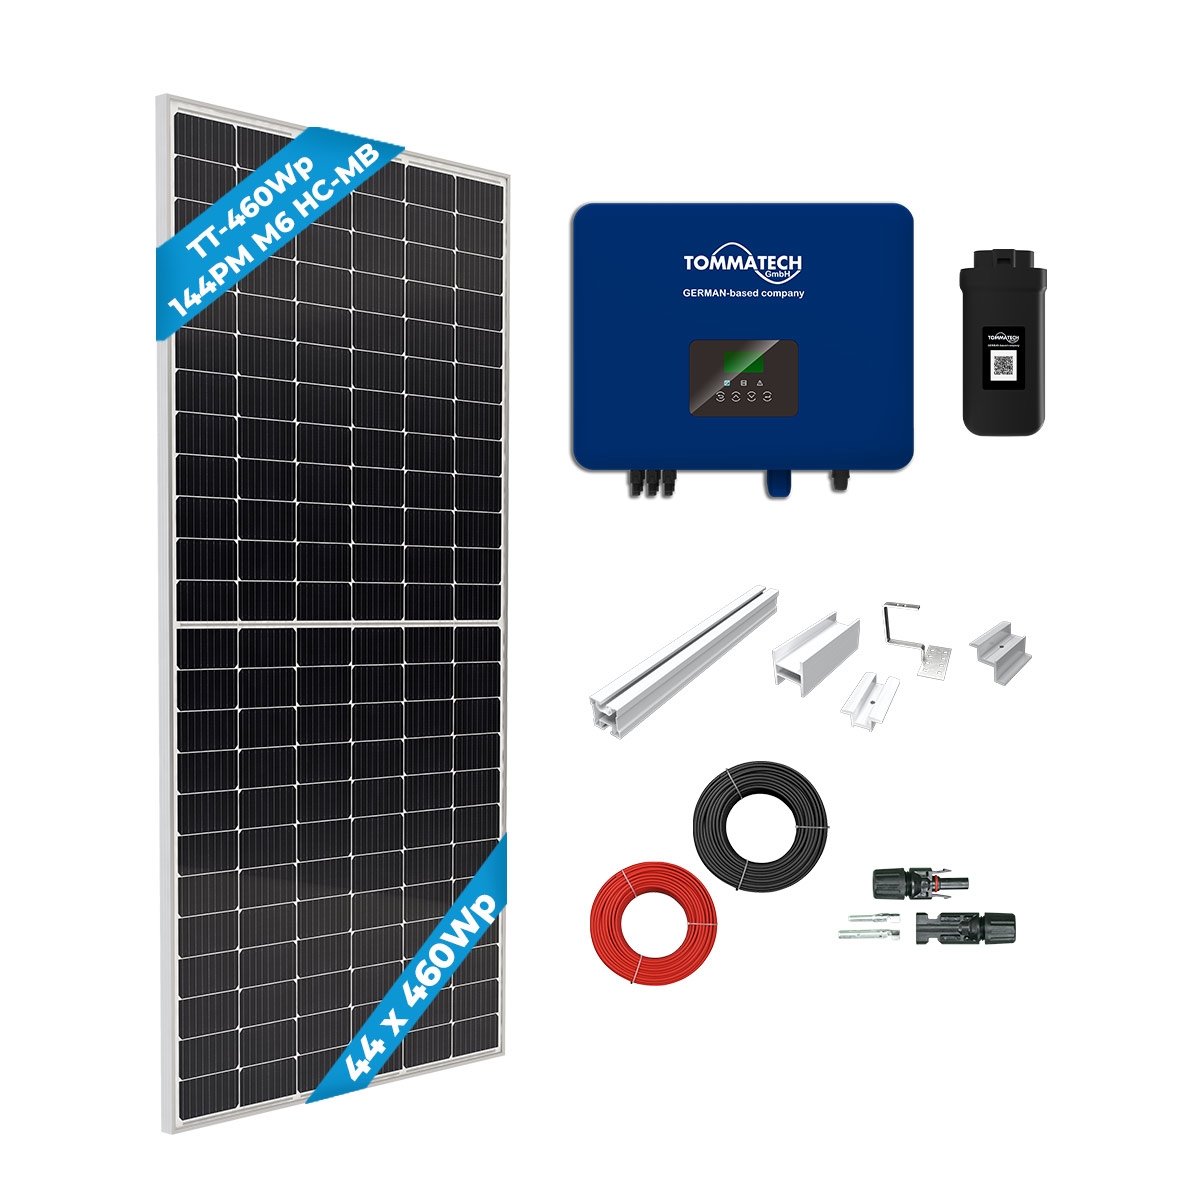 TommaTech 20kWe Tile Roof Three Phase On-Grid Solar Package